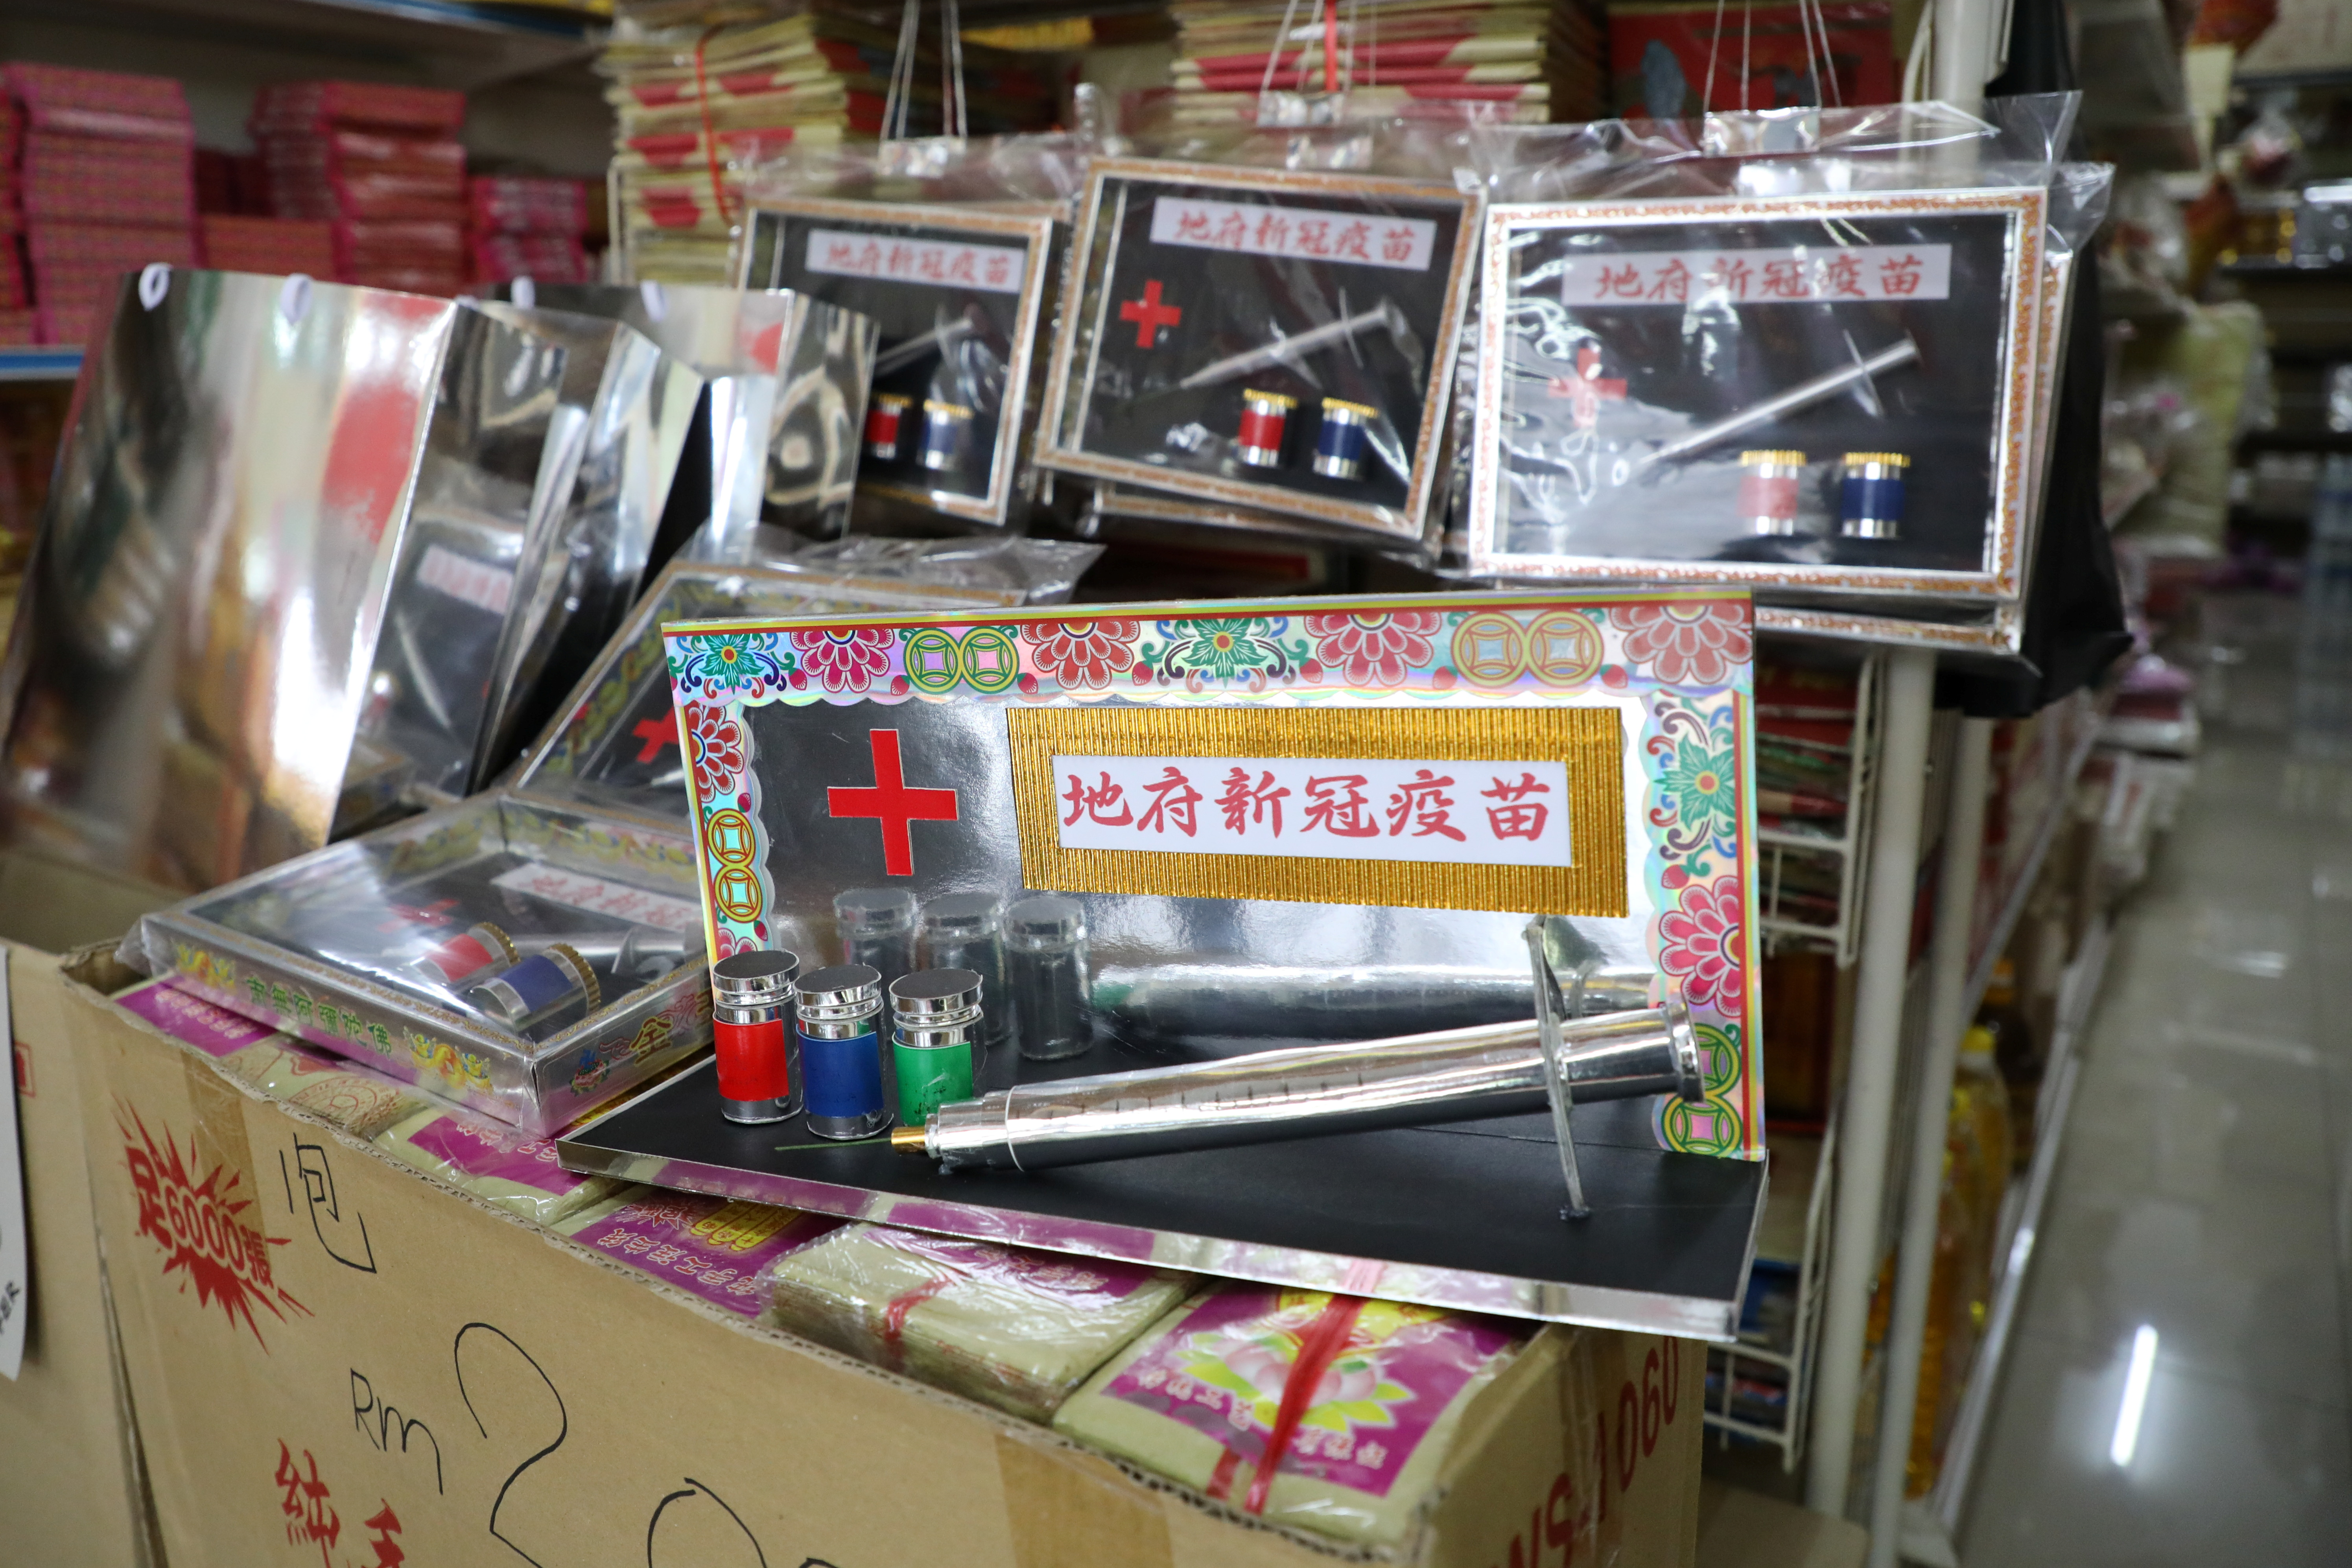 Handmade paper vaccines are displayed for sale at a prayer paraphernalia shop in Johor Bahru